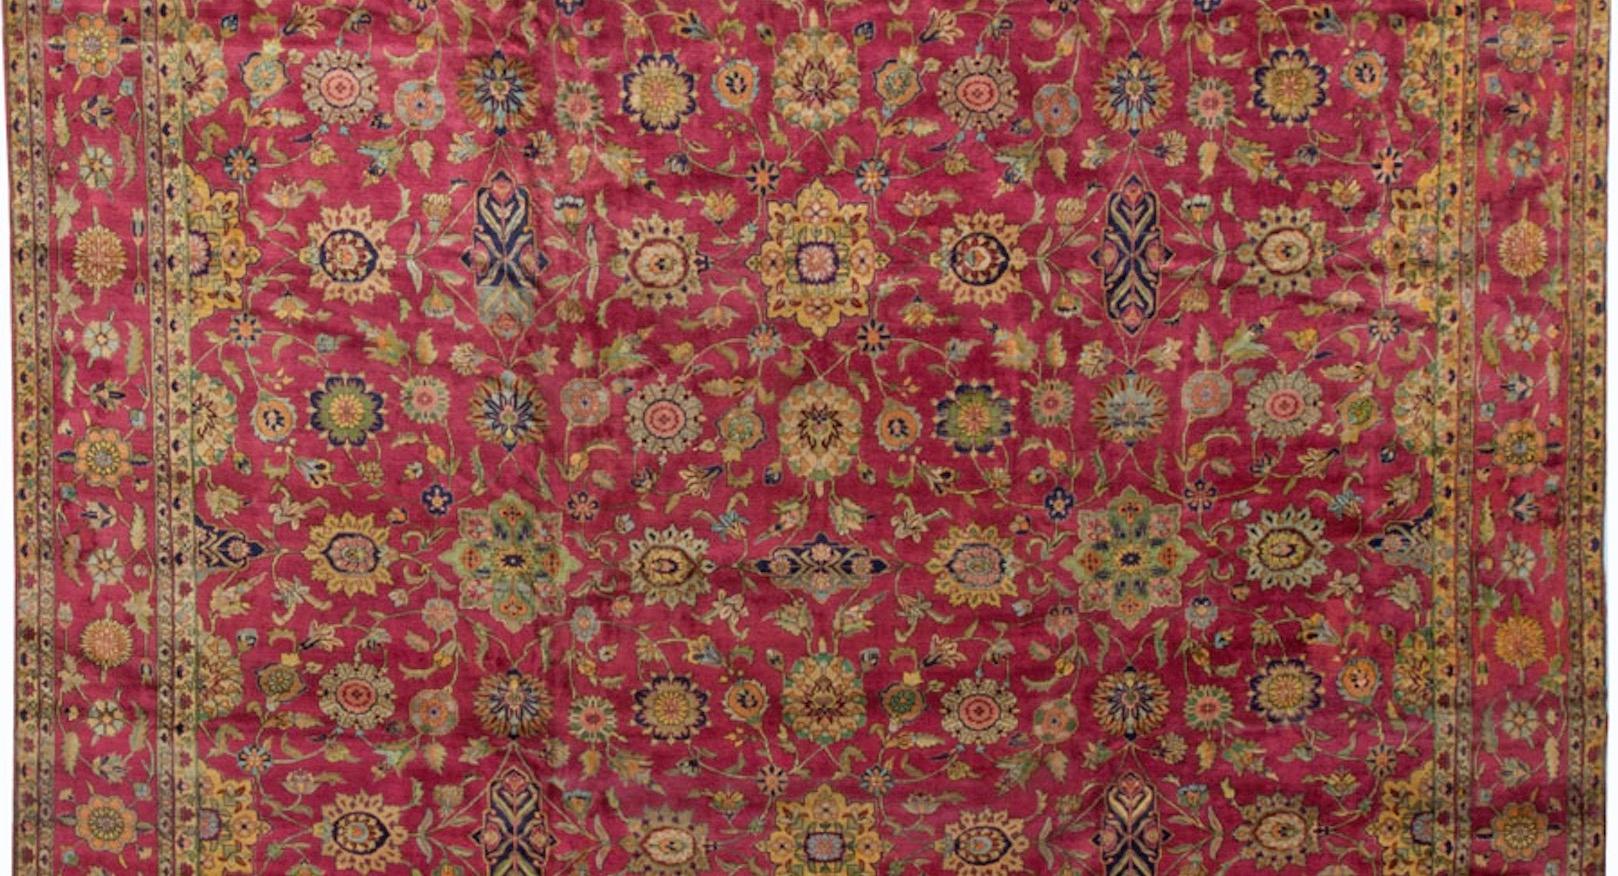 Hand-Woven Antique Indian Agra Rug, circa 1890 14'4 x 15'11 For Sale